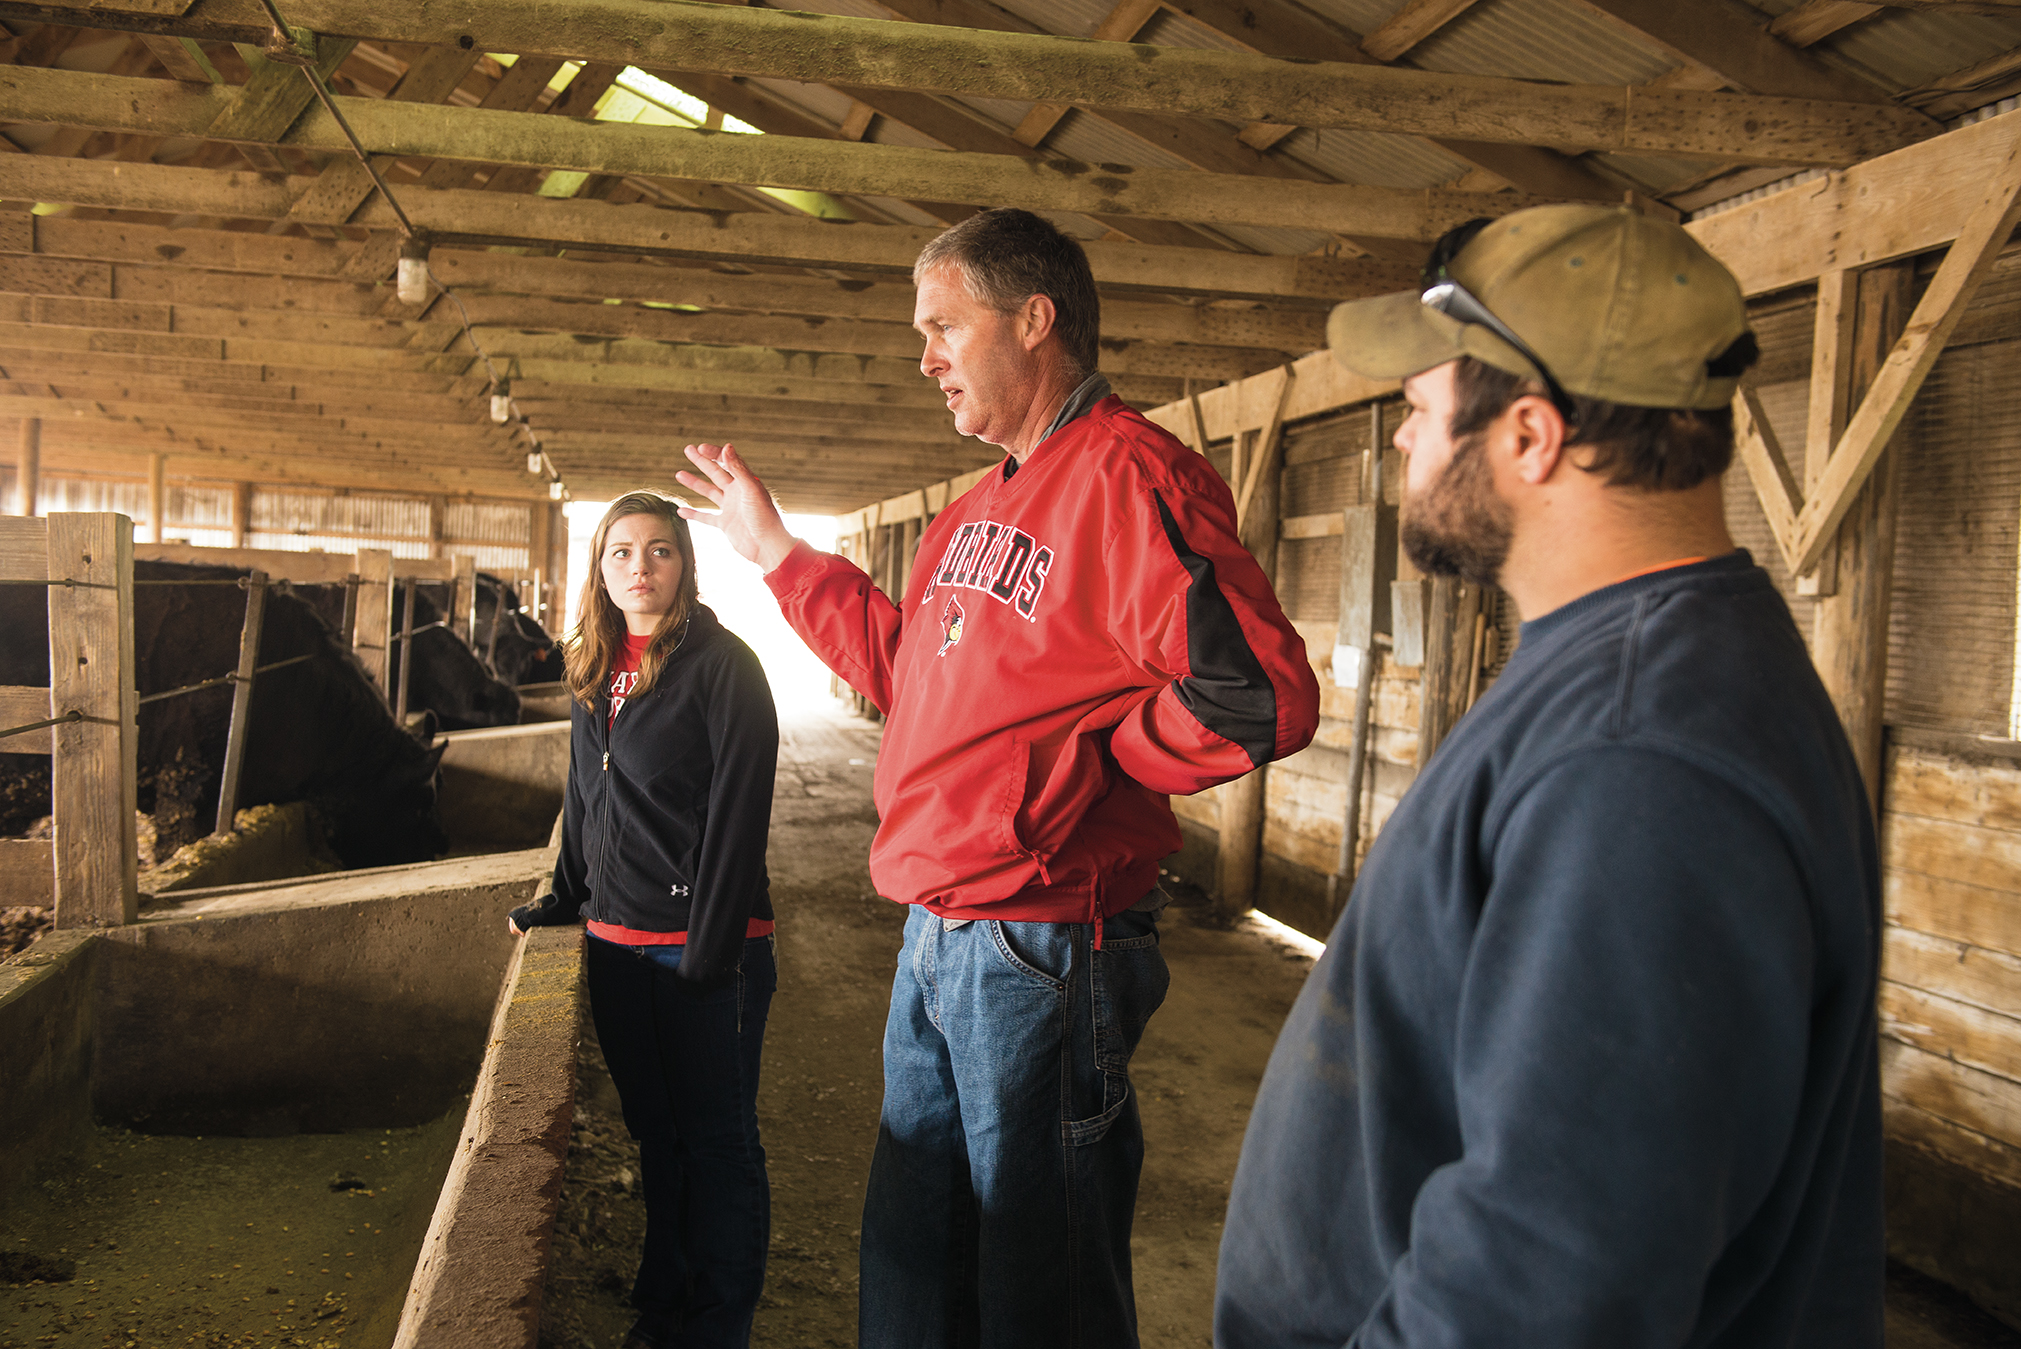 David Malone (in the red jacket), undergraduate advisor in the Department of Agriculture, evaluates the cattle. Malone walked by each pen and visually graded the animals based on their physical appearance, stating the quality of the meat— high-choice yield grade 2, low-choice yield grade 2.8, etc.— each would be expected to produce once they went to market. “He was spot on,” Parmenter said. “He happens to be one of the best live animal evaluators I’ve ever met,” Rickard said.